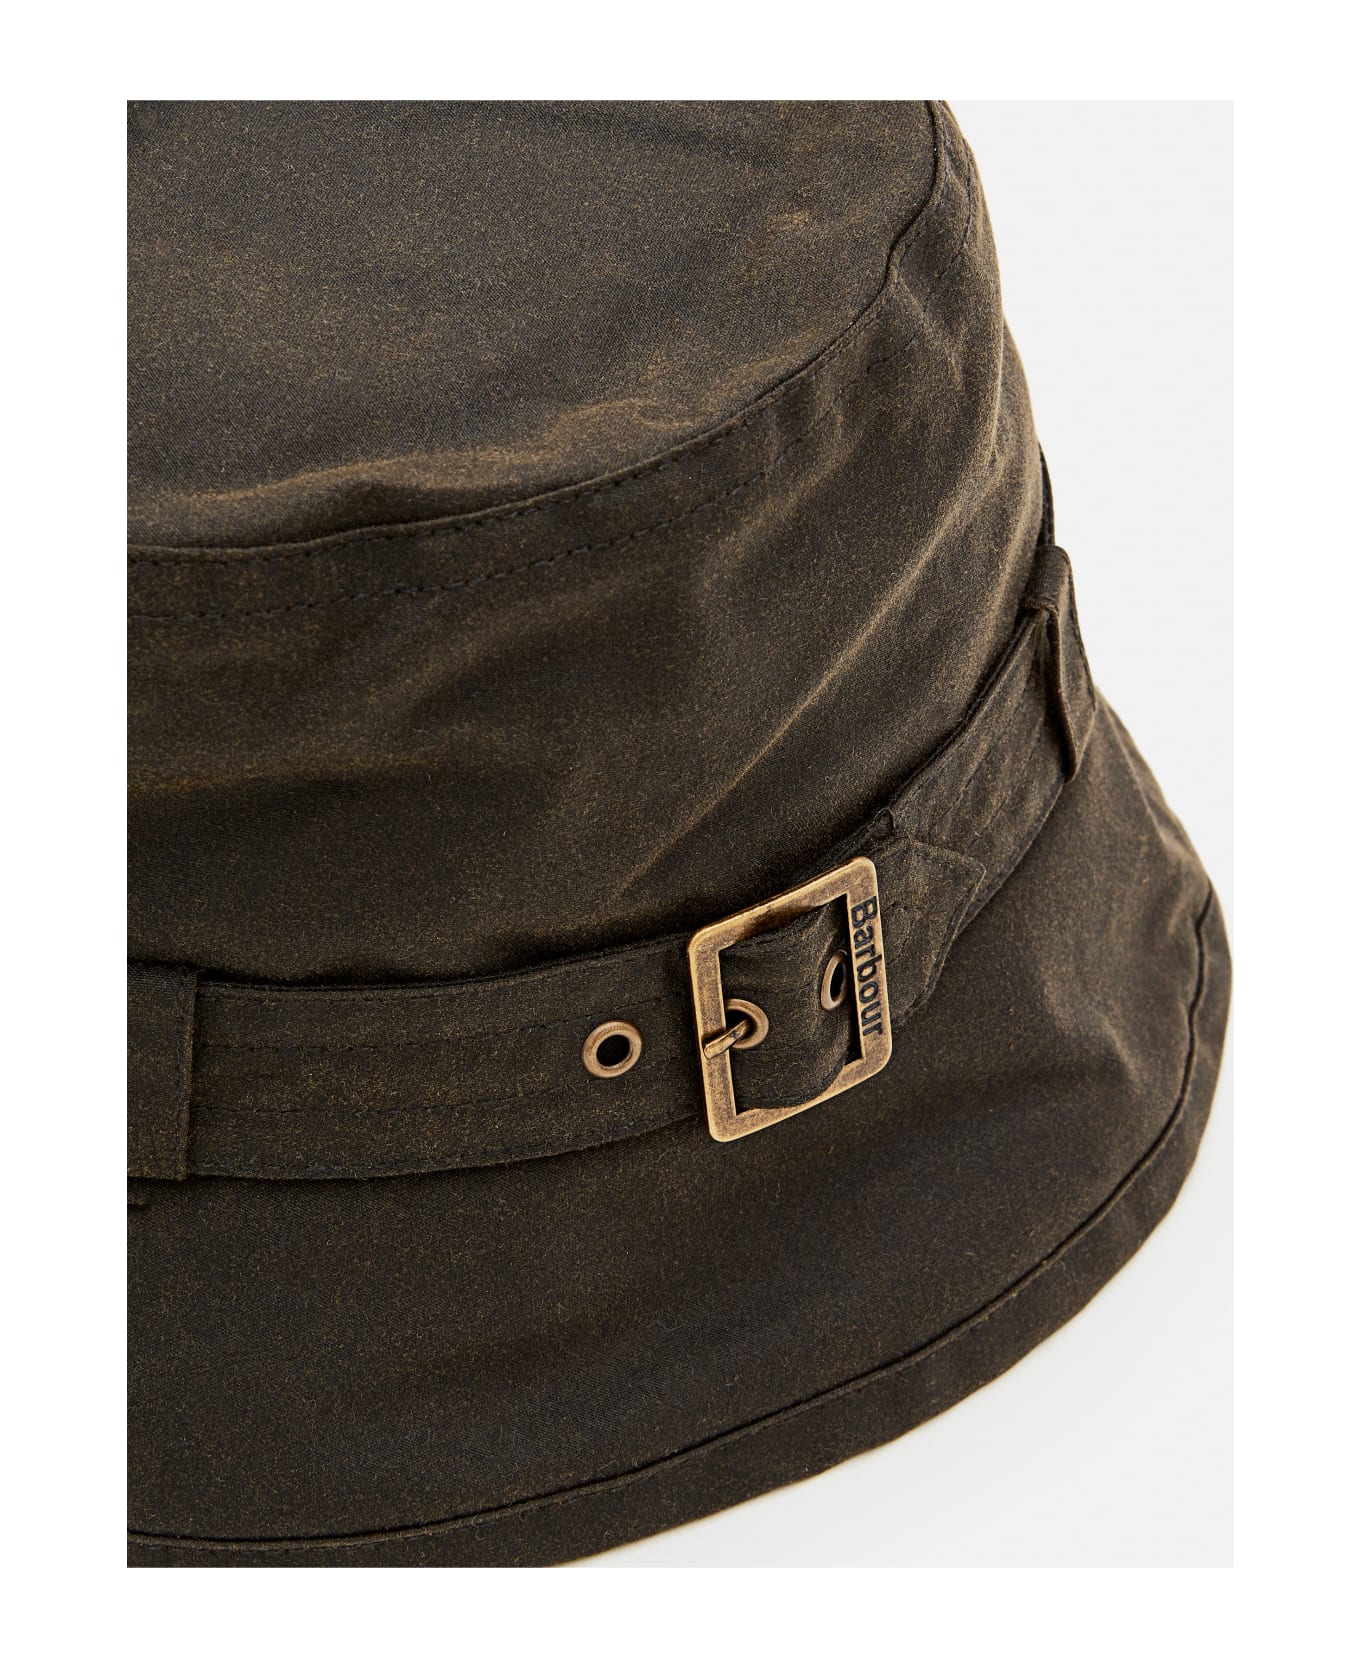 Barbour Kelso Waxed Cotton Belted Bucket Hat - Green 帽子